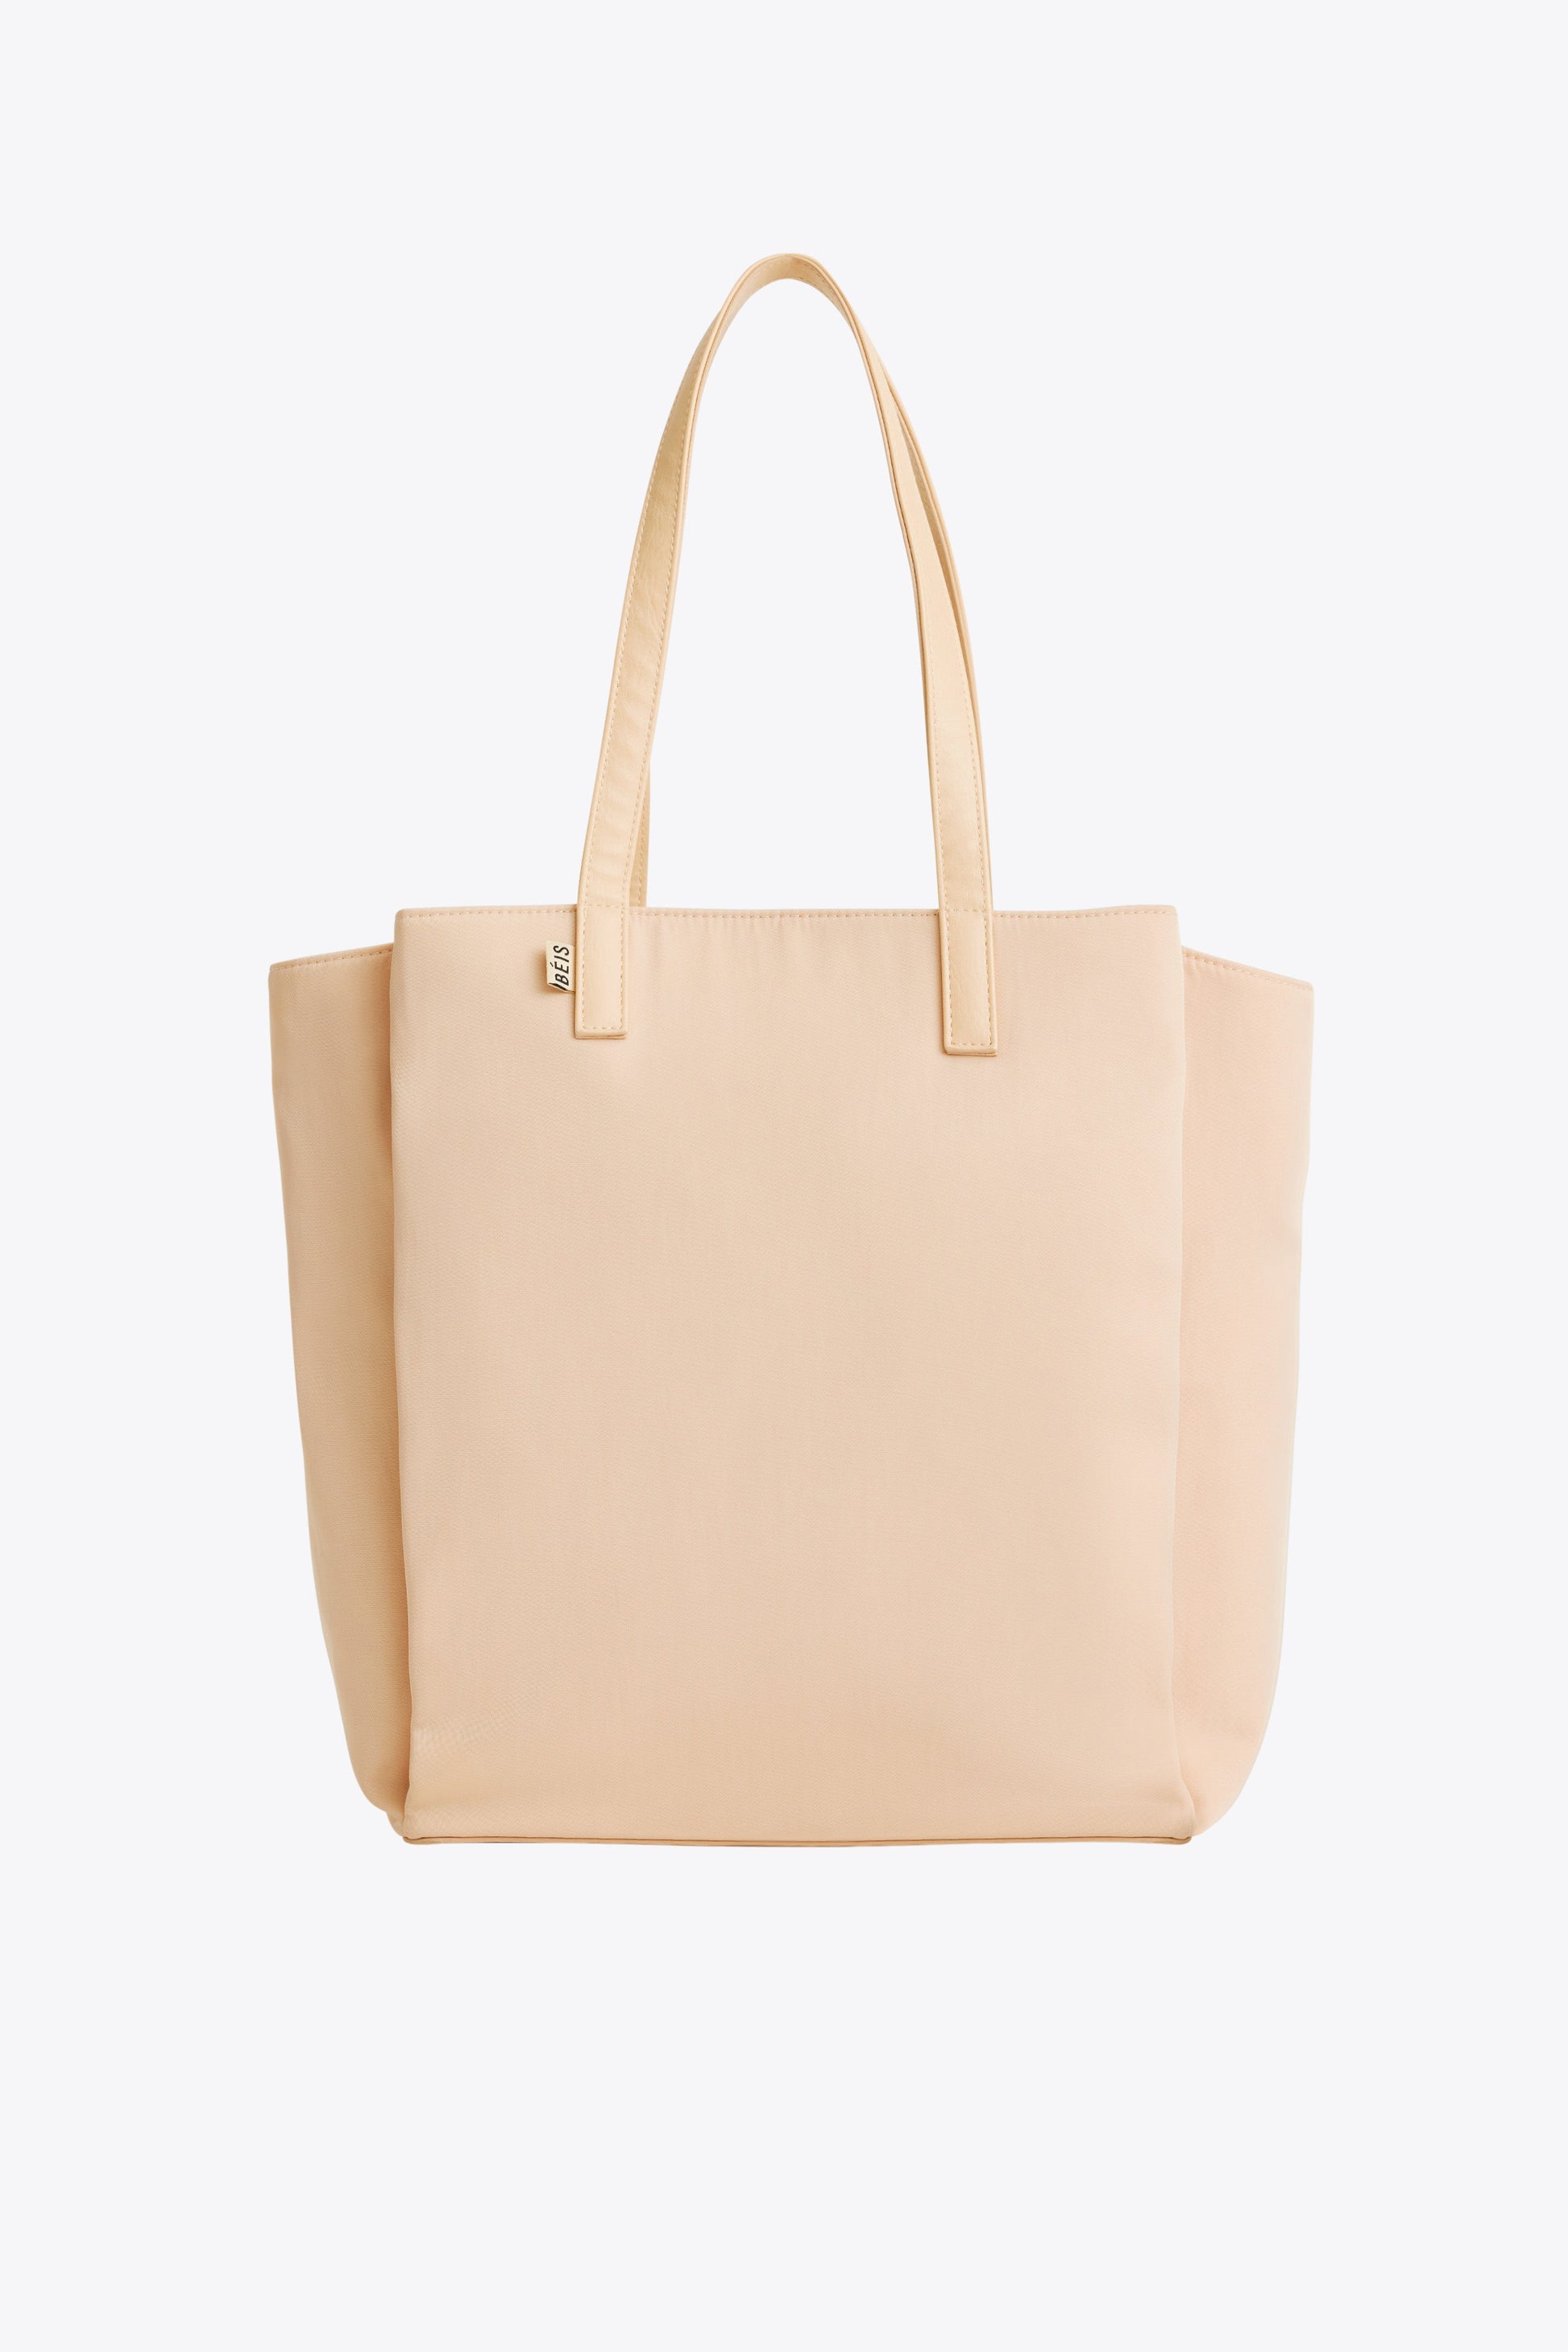 Canvas Leather Tote Bag Beige/Brown